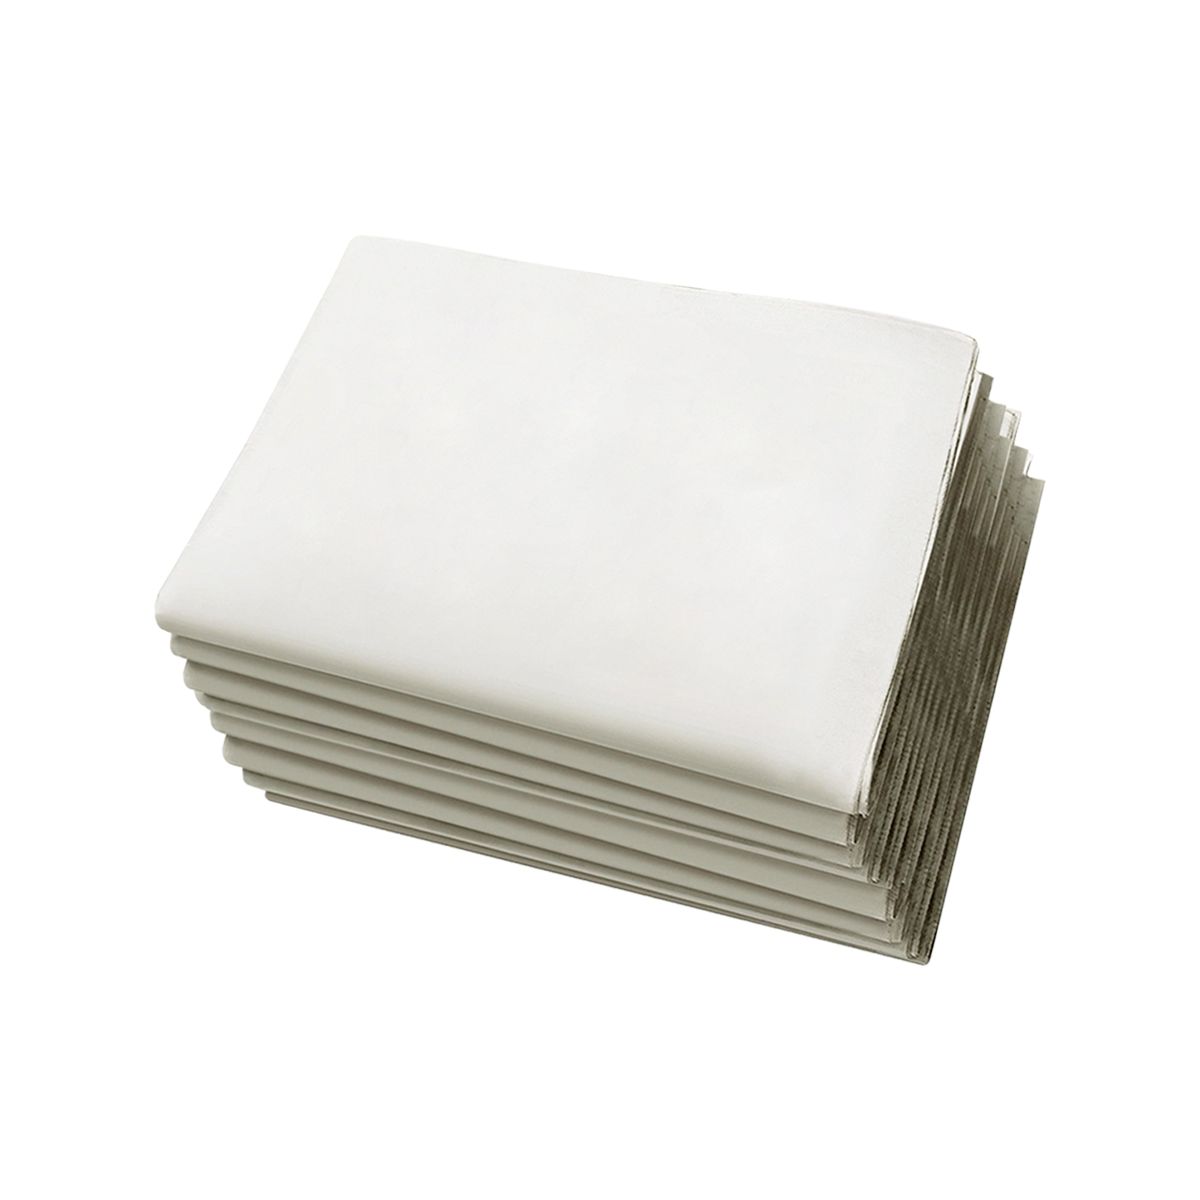 Packing Paper Sheets for Moving,Newsprint Packing Paper for